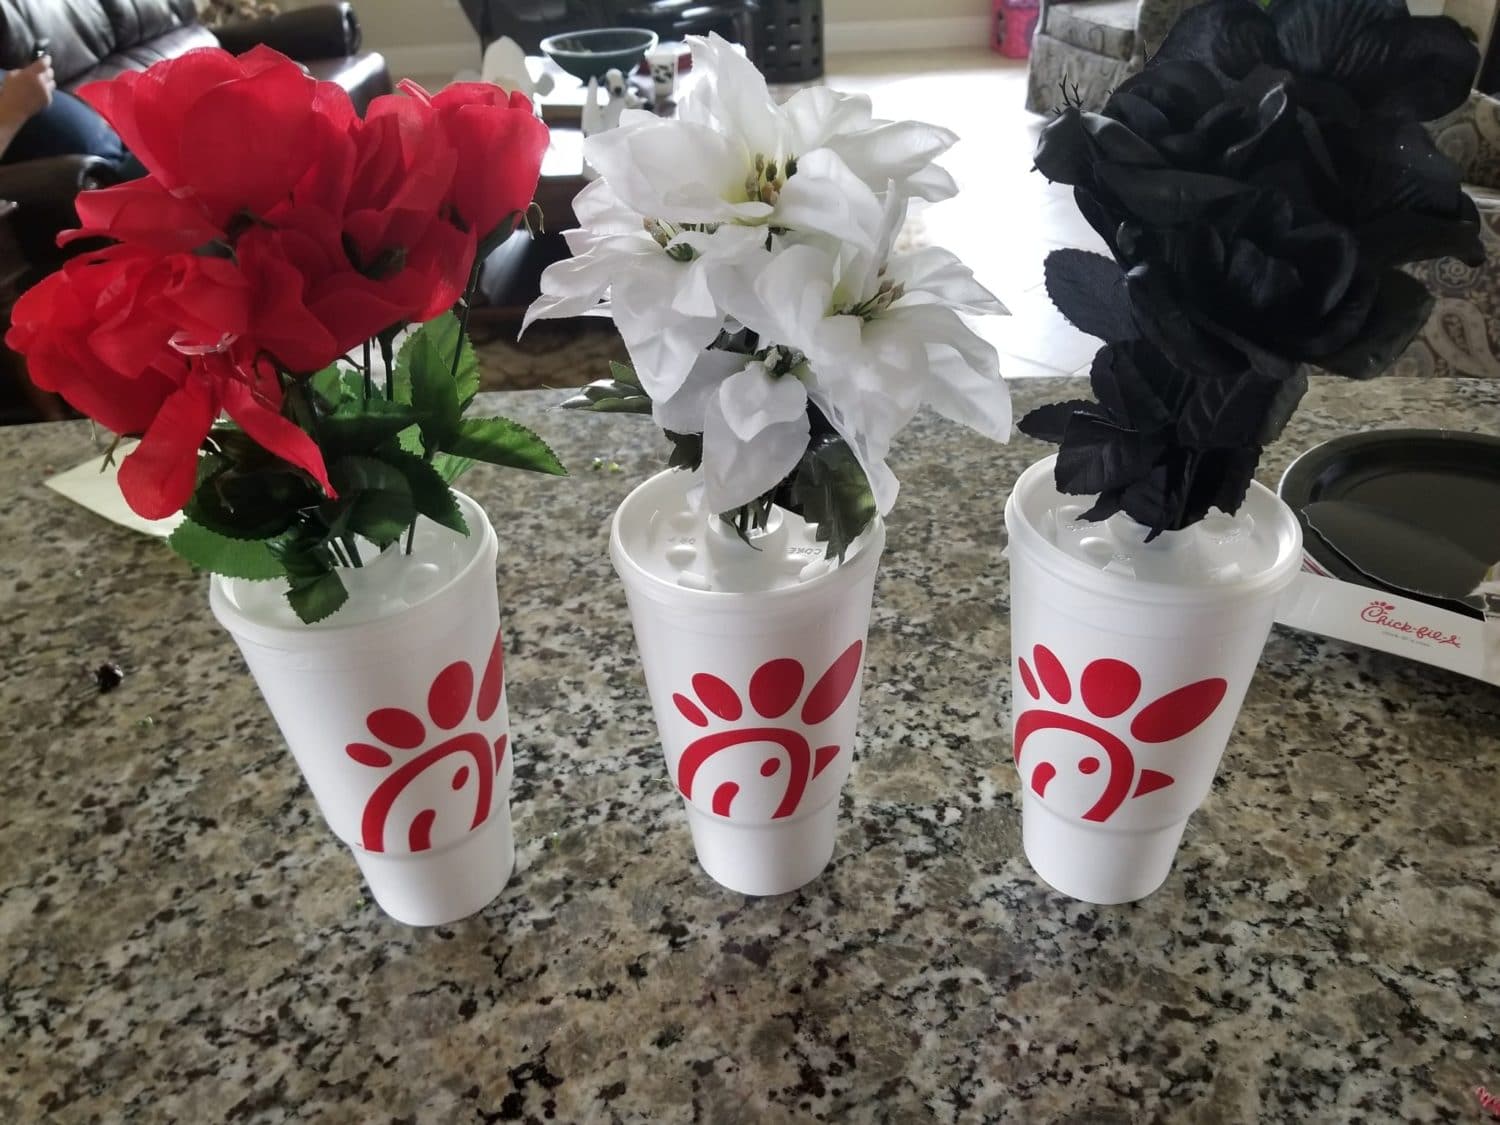 Chick-fil-A Birthday Party Ideas and Decorations-60th Birthday